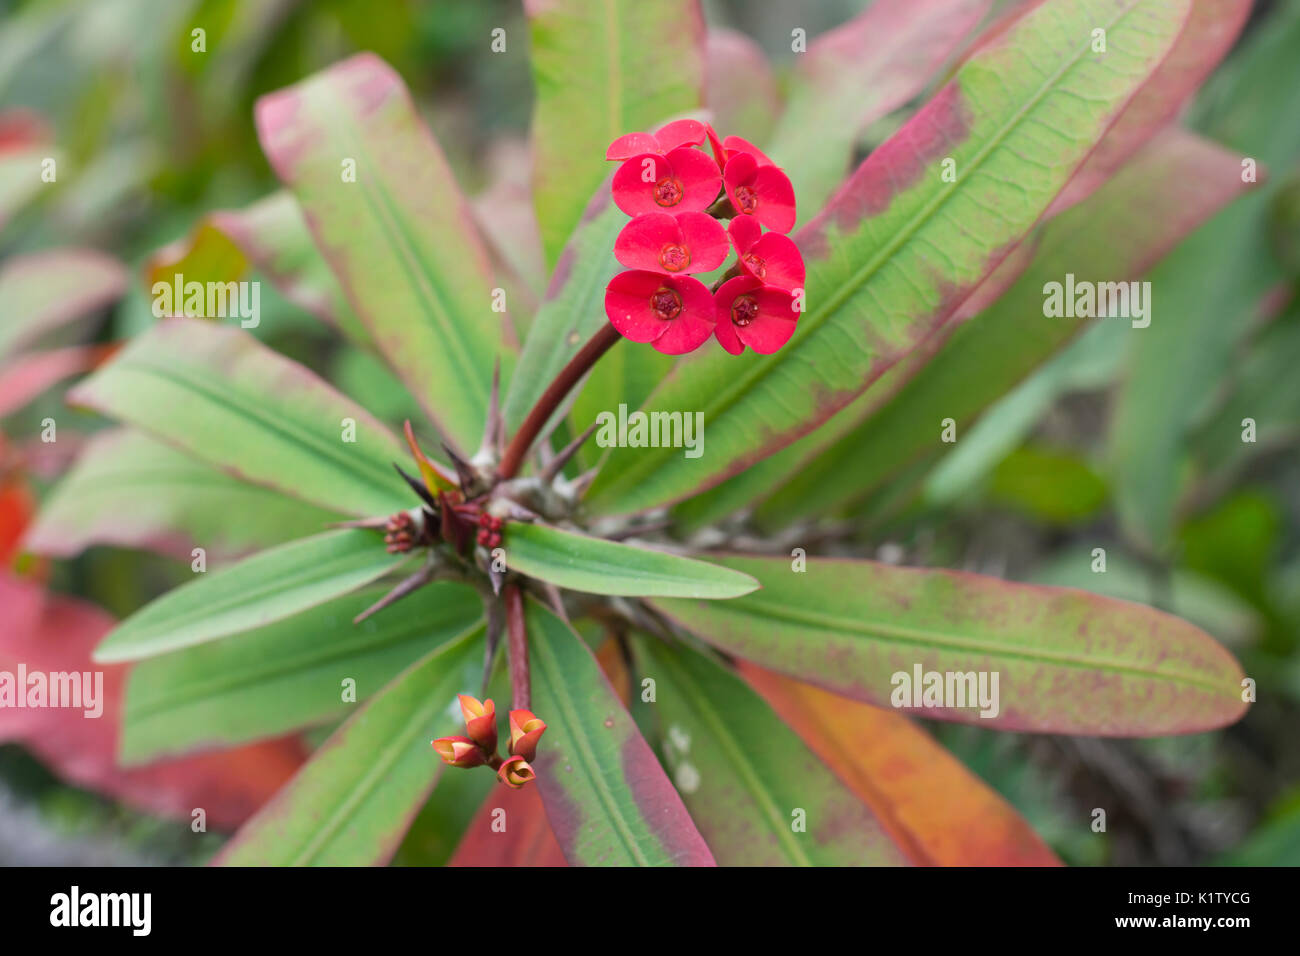 Red flowers of the Euphorbia milii var. splendens, common names Crown of thorns, Christ plant, Christ thorn Stock Photo